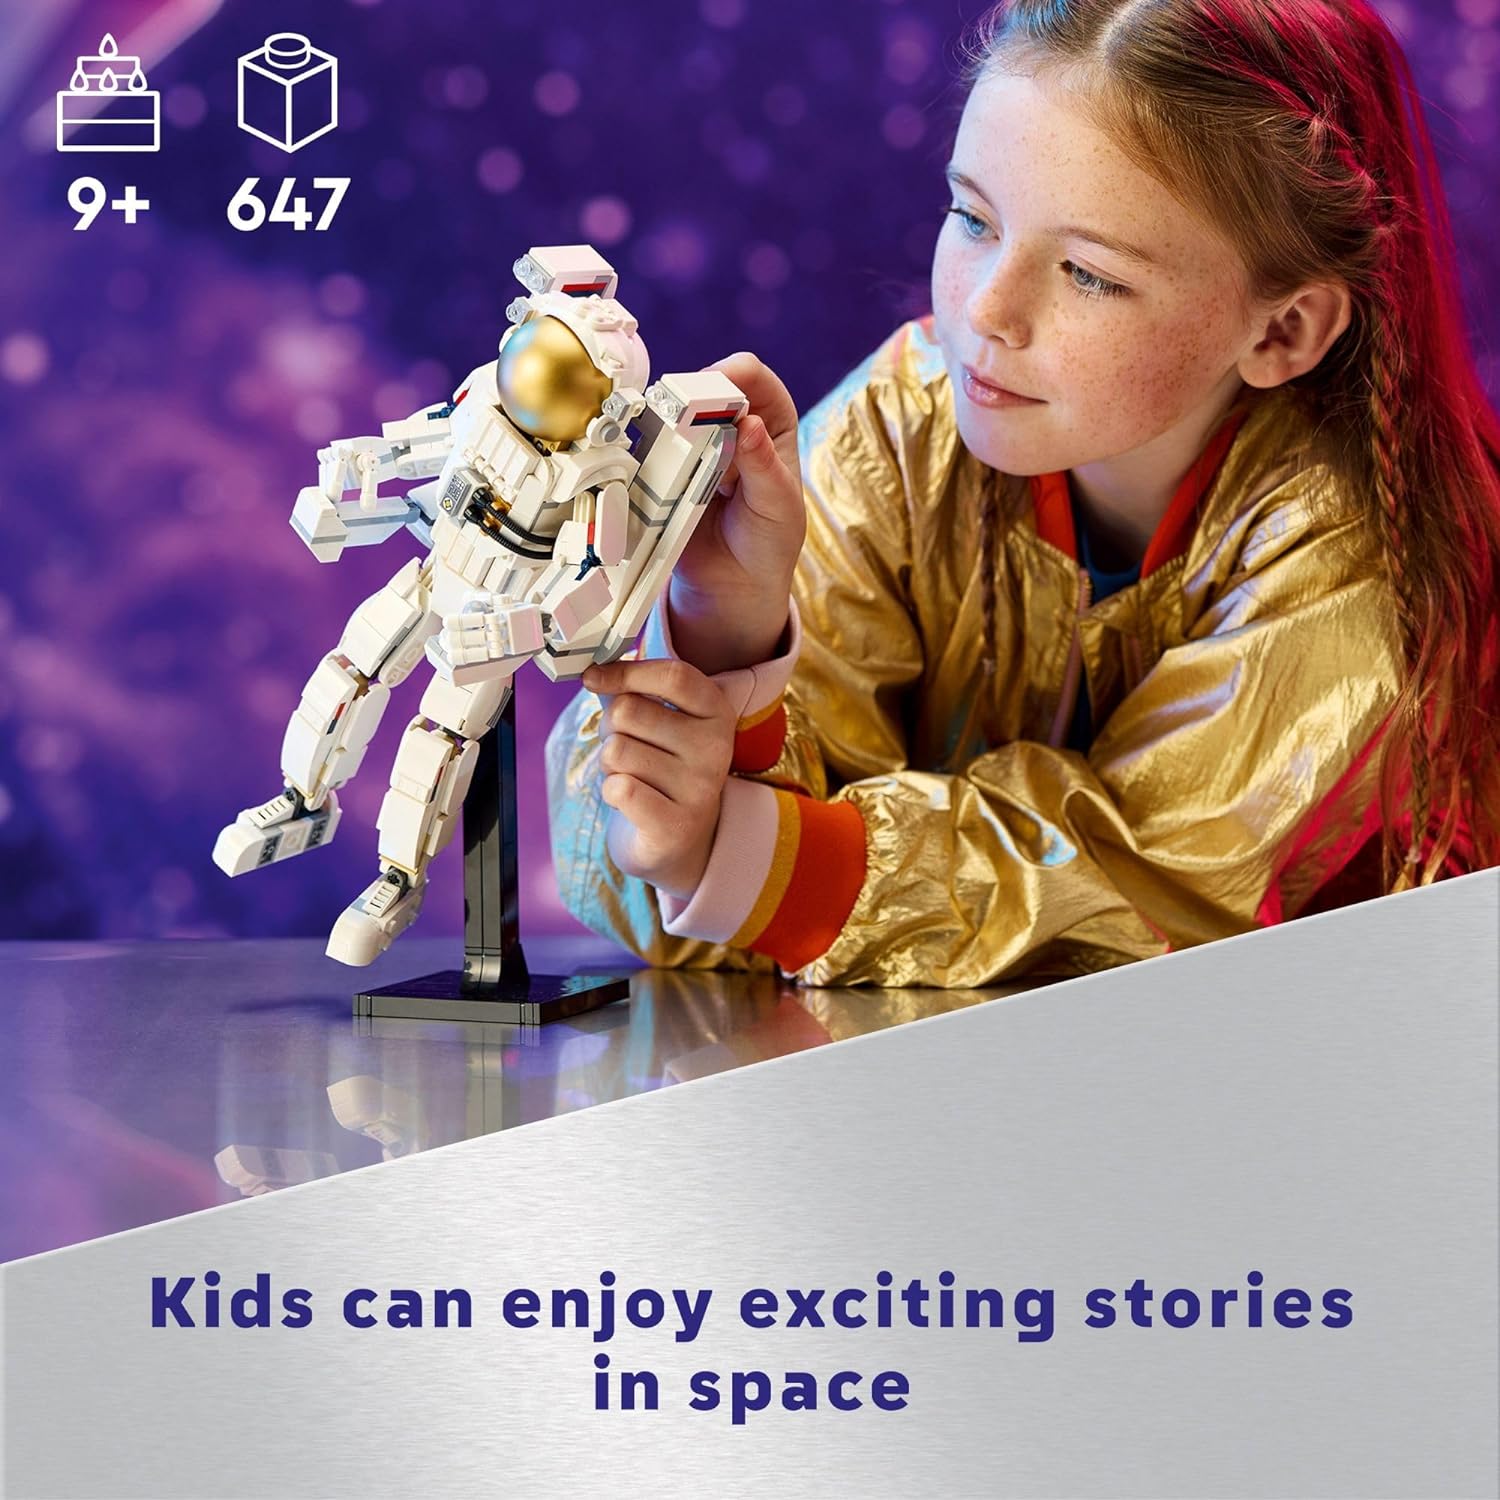 LEGO Creator 31152 3 in 1 Space Astronaut Toy, Building Set Transforms from Astronaut Figure to Space Dog to Viper Jet, Space-Themed Gift Idea for Boys and Girls